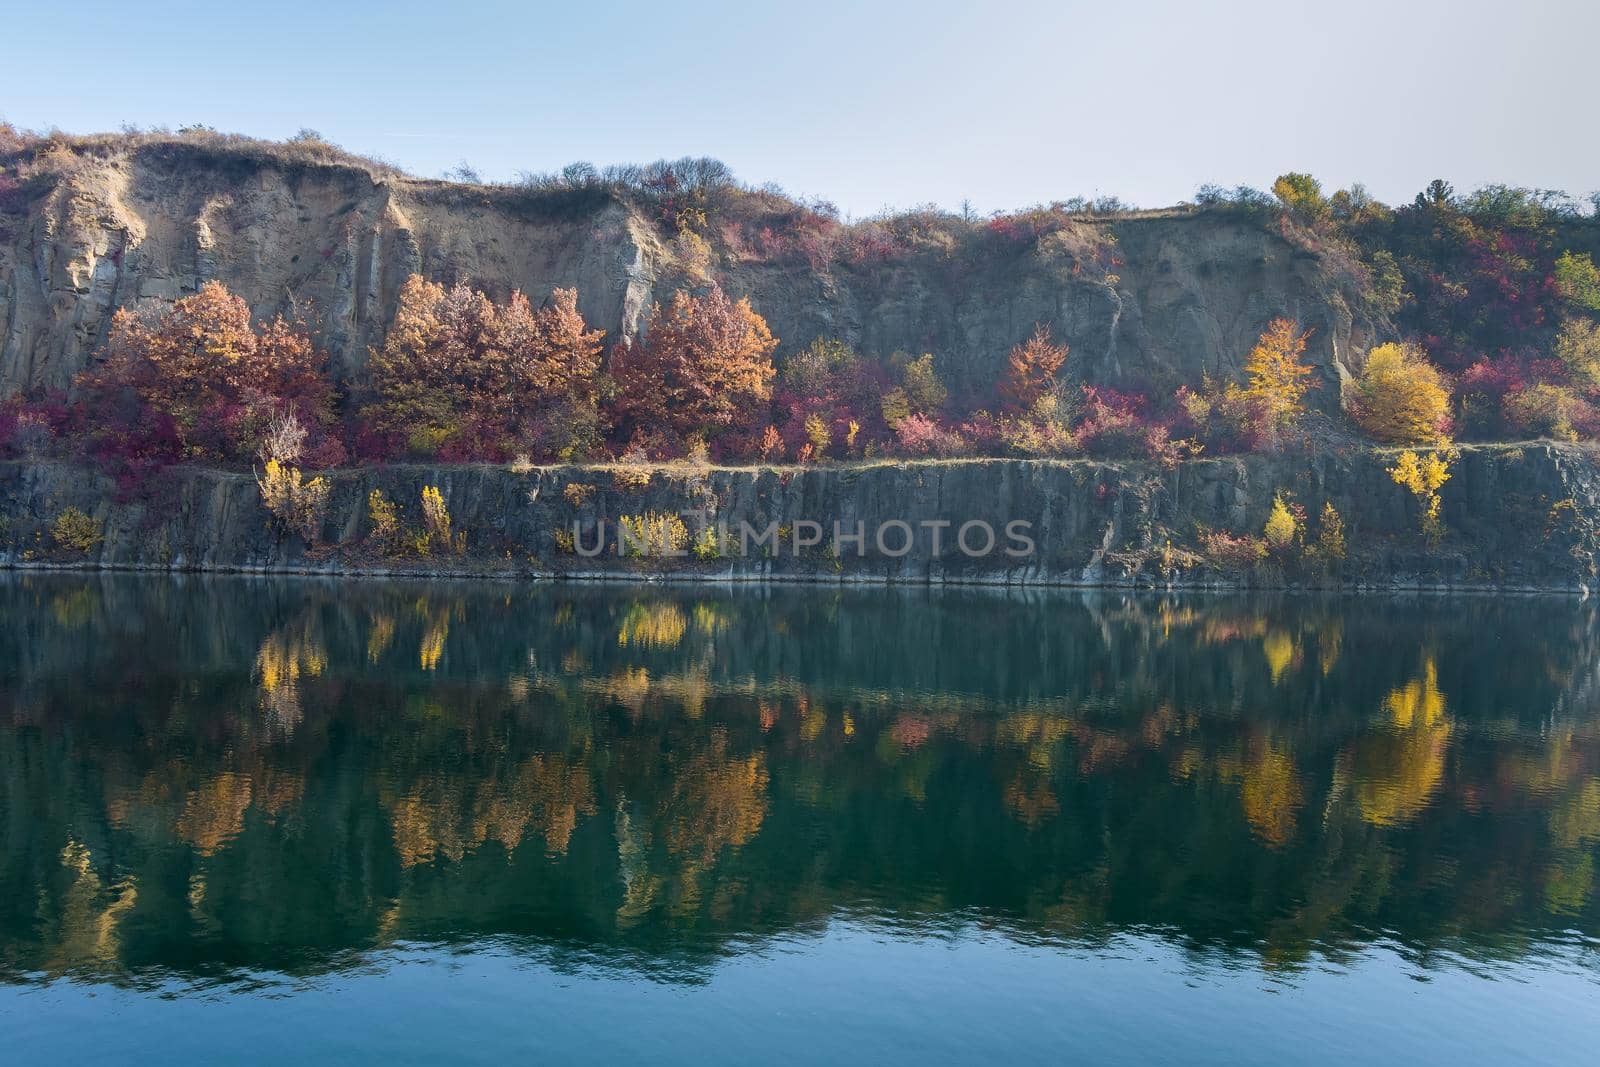 View of the artificial lake in a flooded part of a granite quarry lined with stone by ungvar